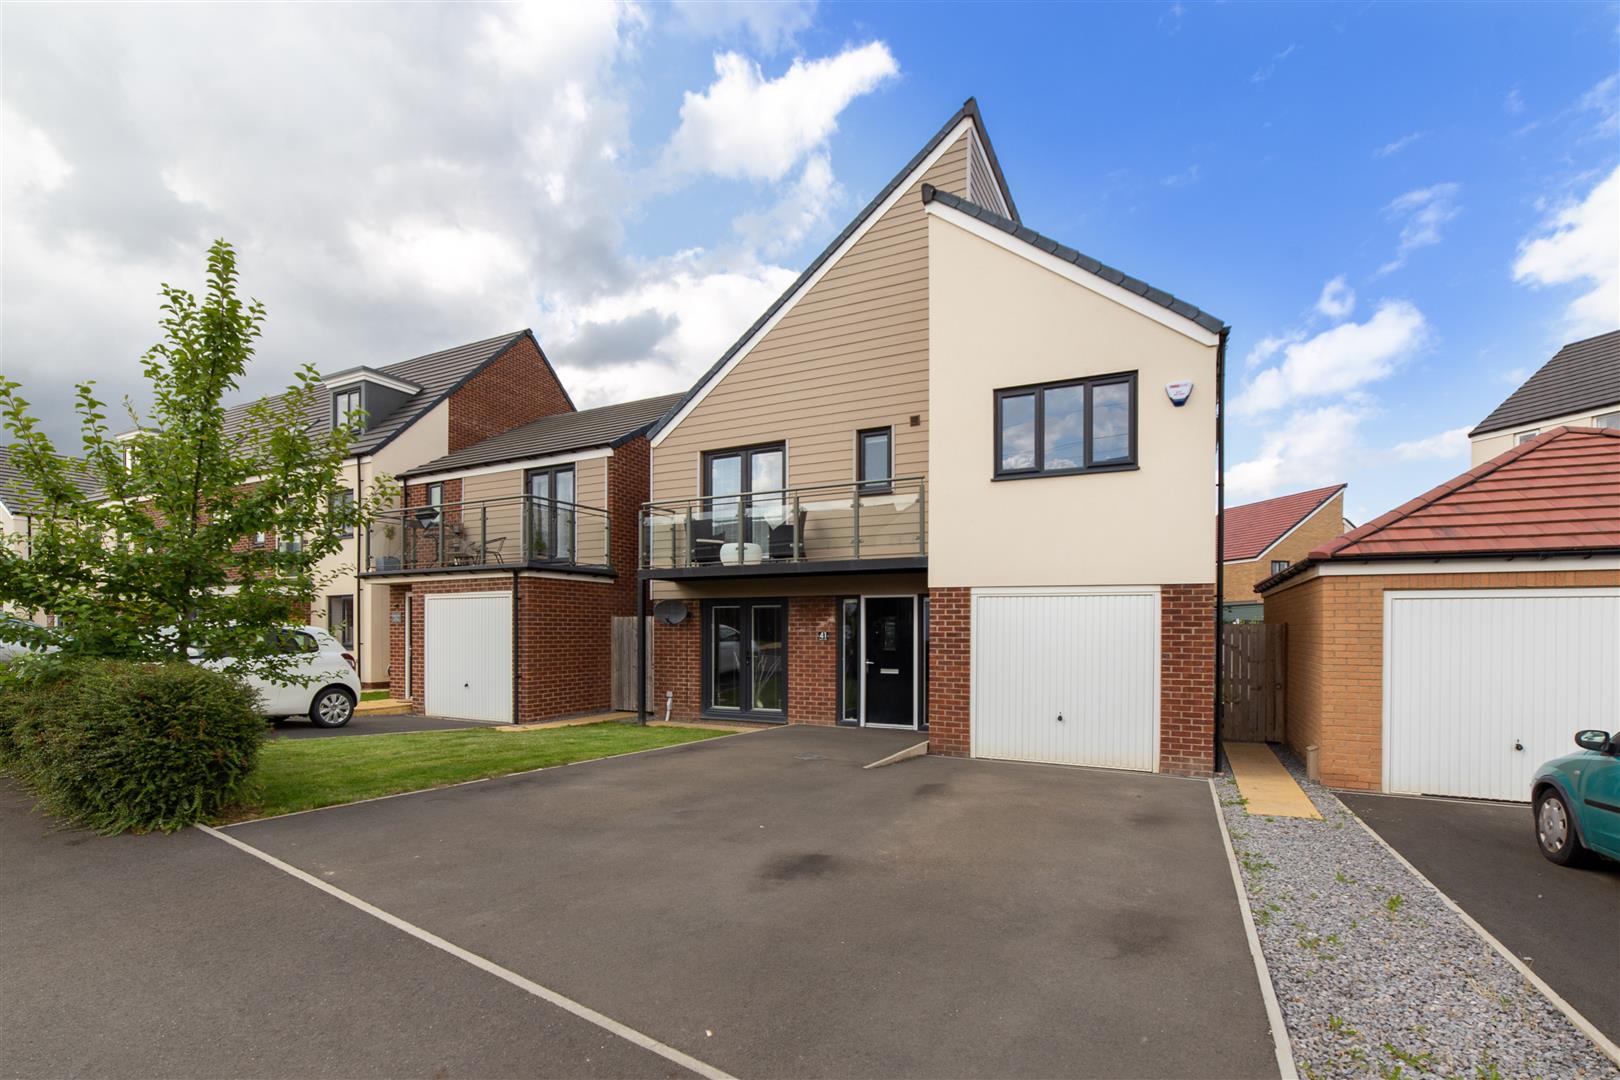 4 bed detached house for sale in Osprey Walk, Great Park 0